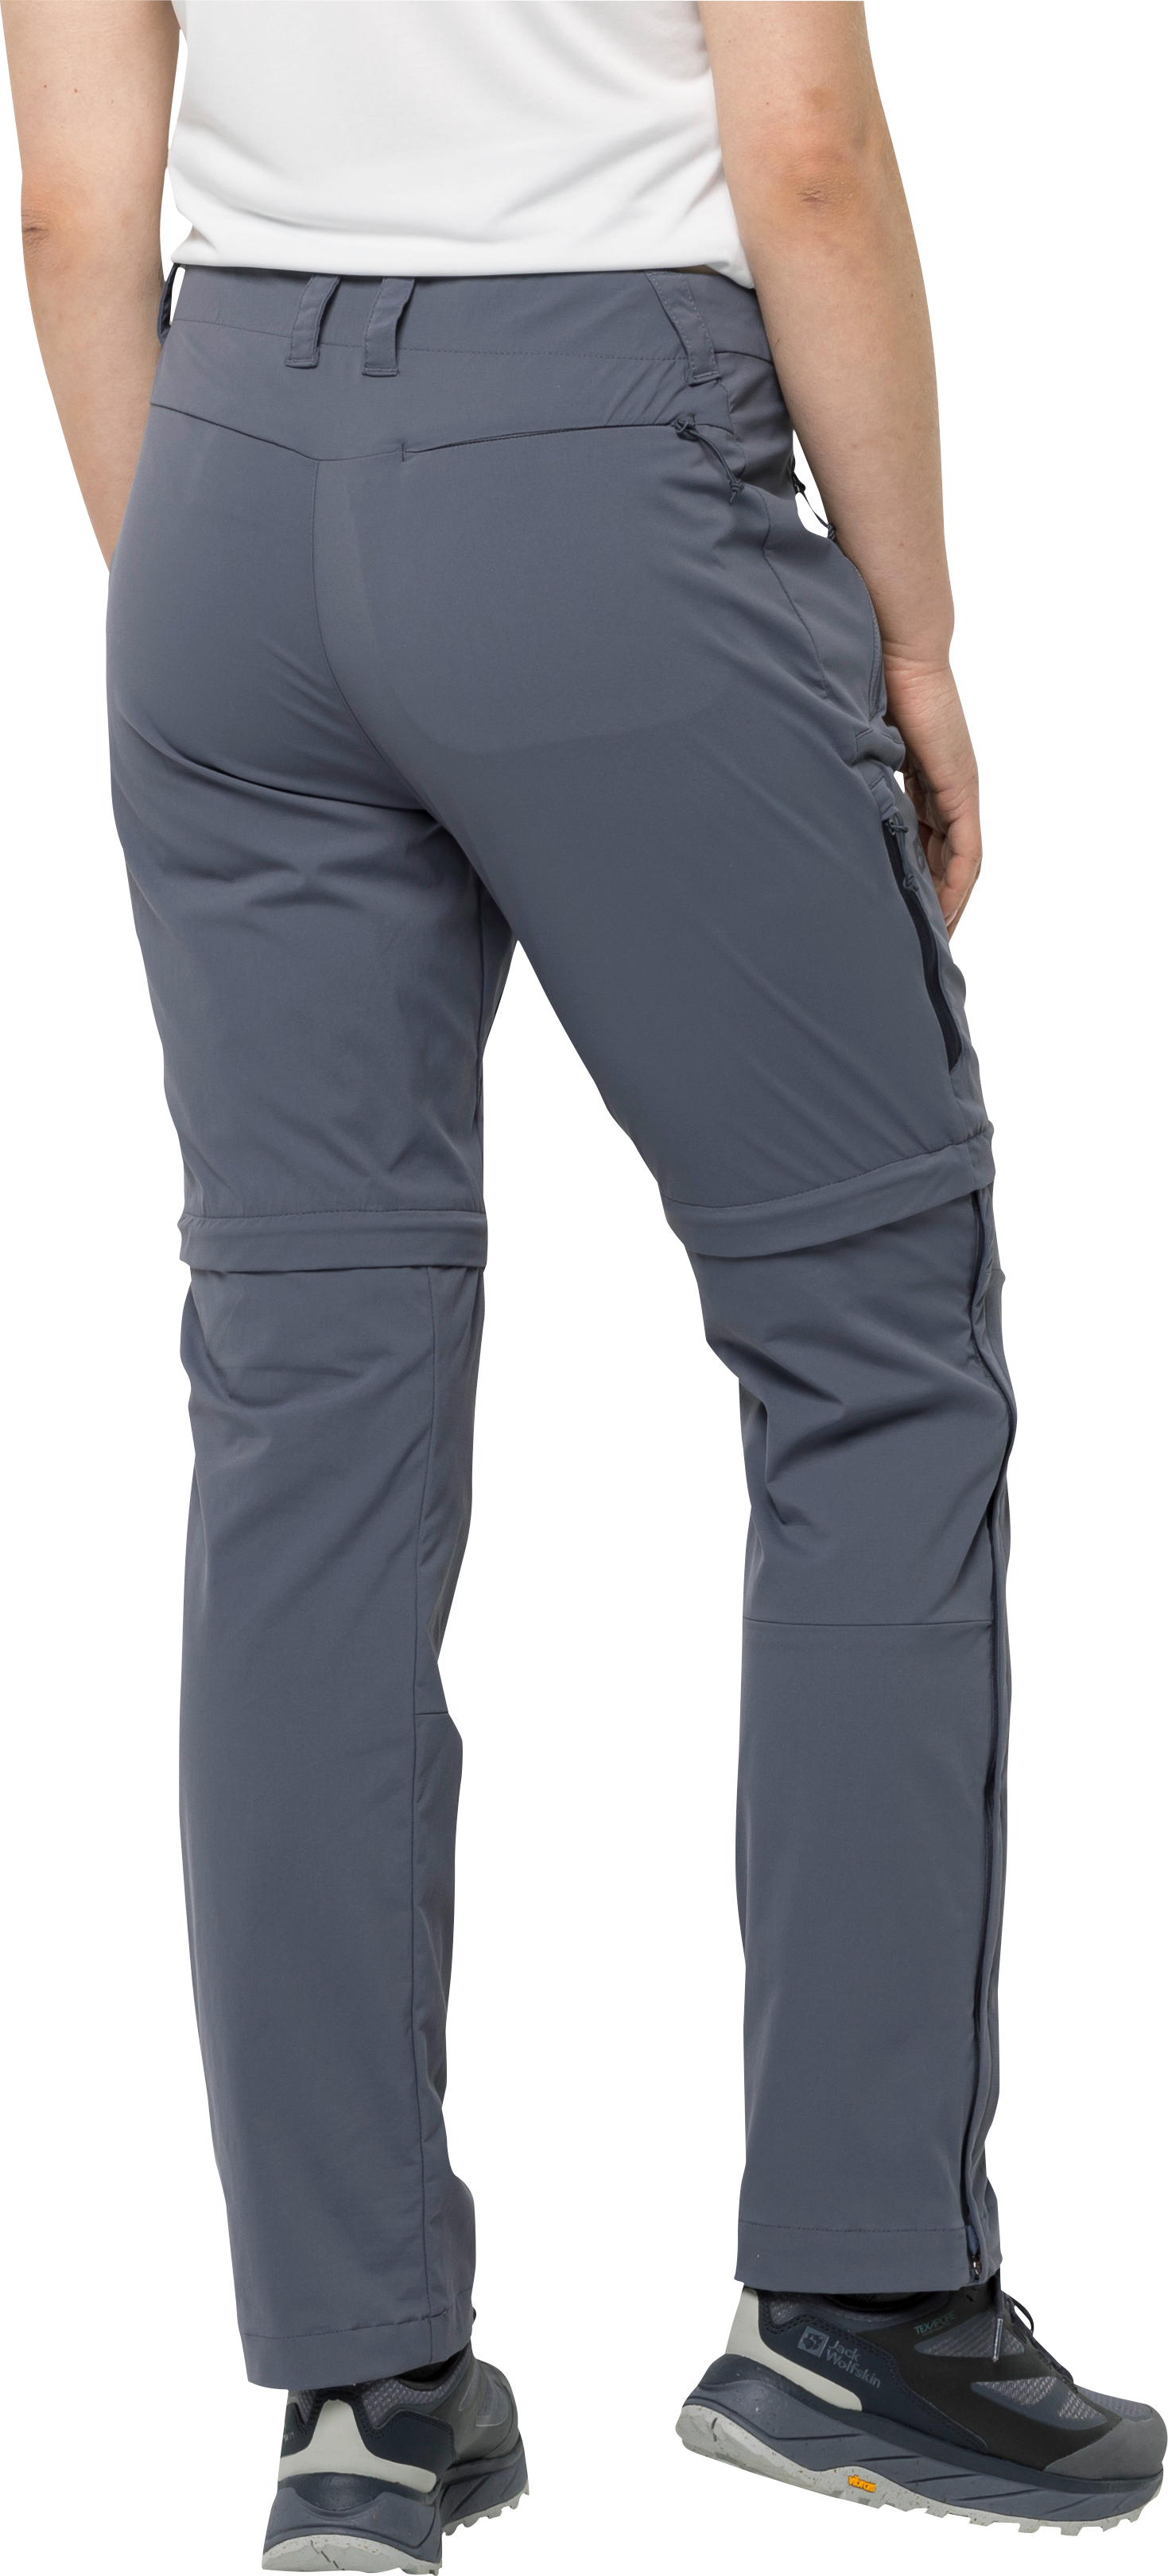 Buy Women's Glastal Zip Away Pants Dolphin here | Outnorth